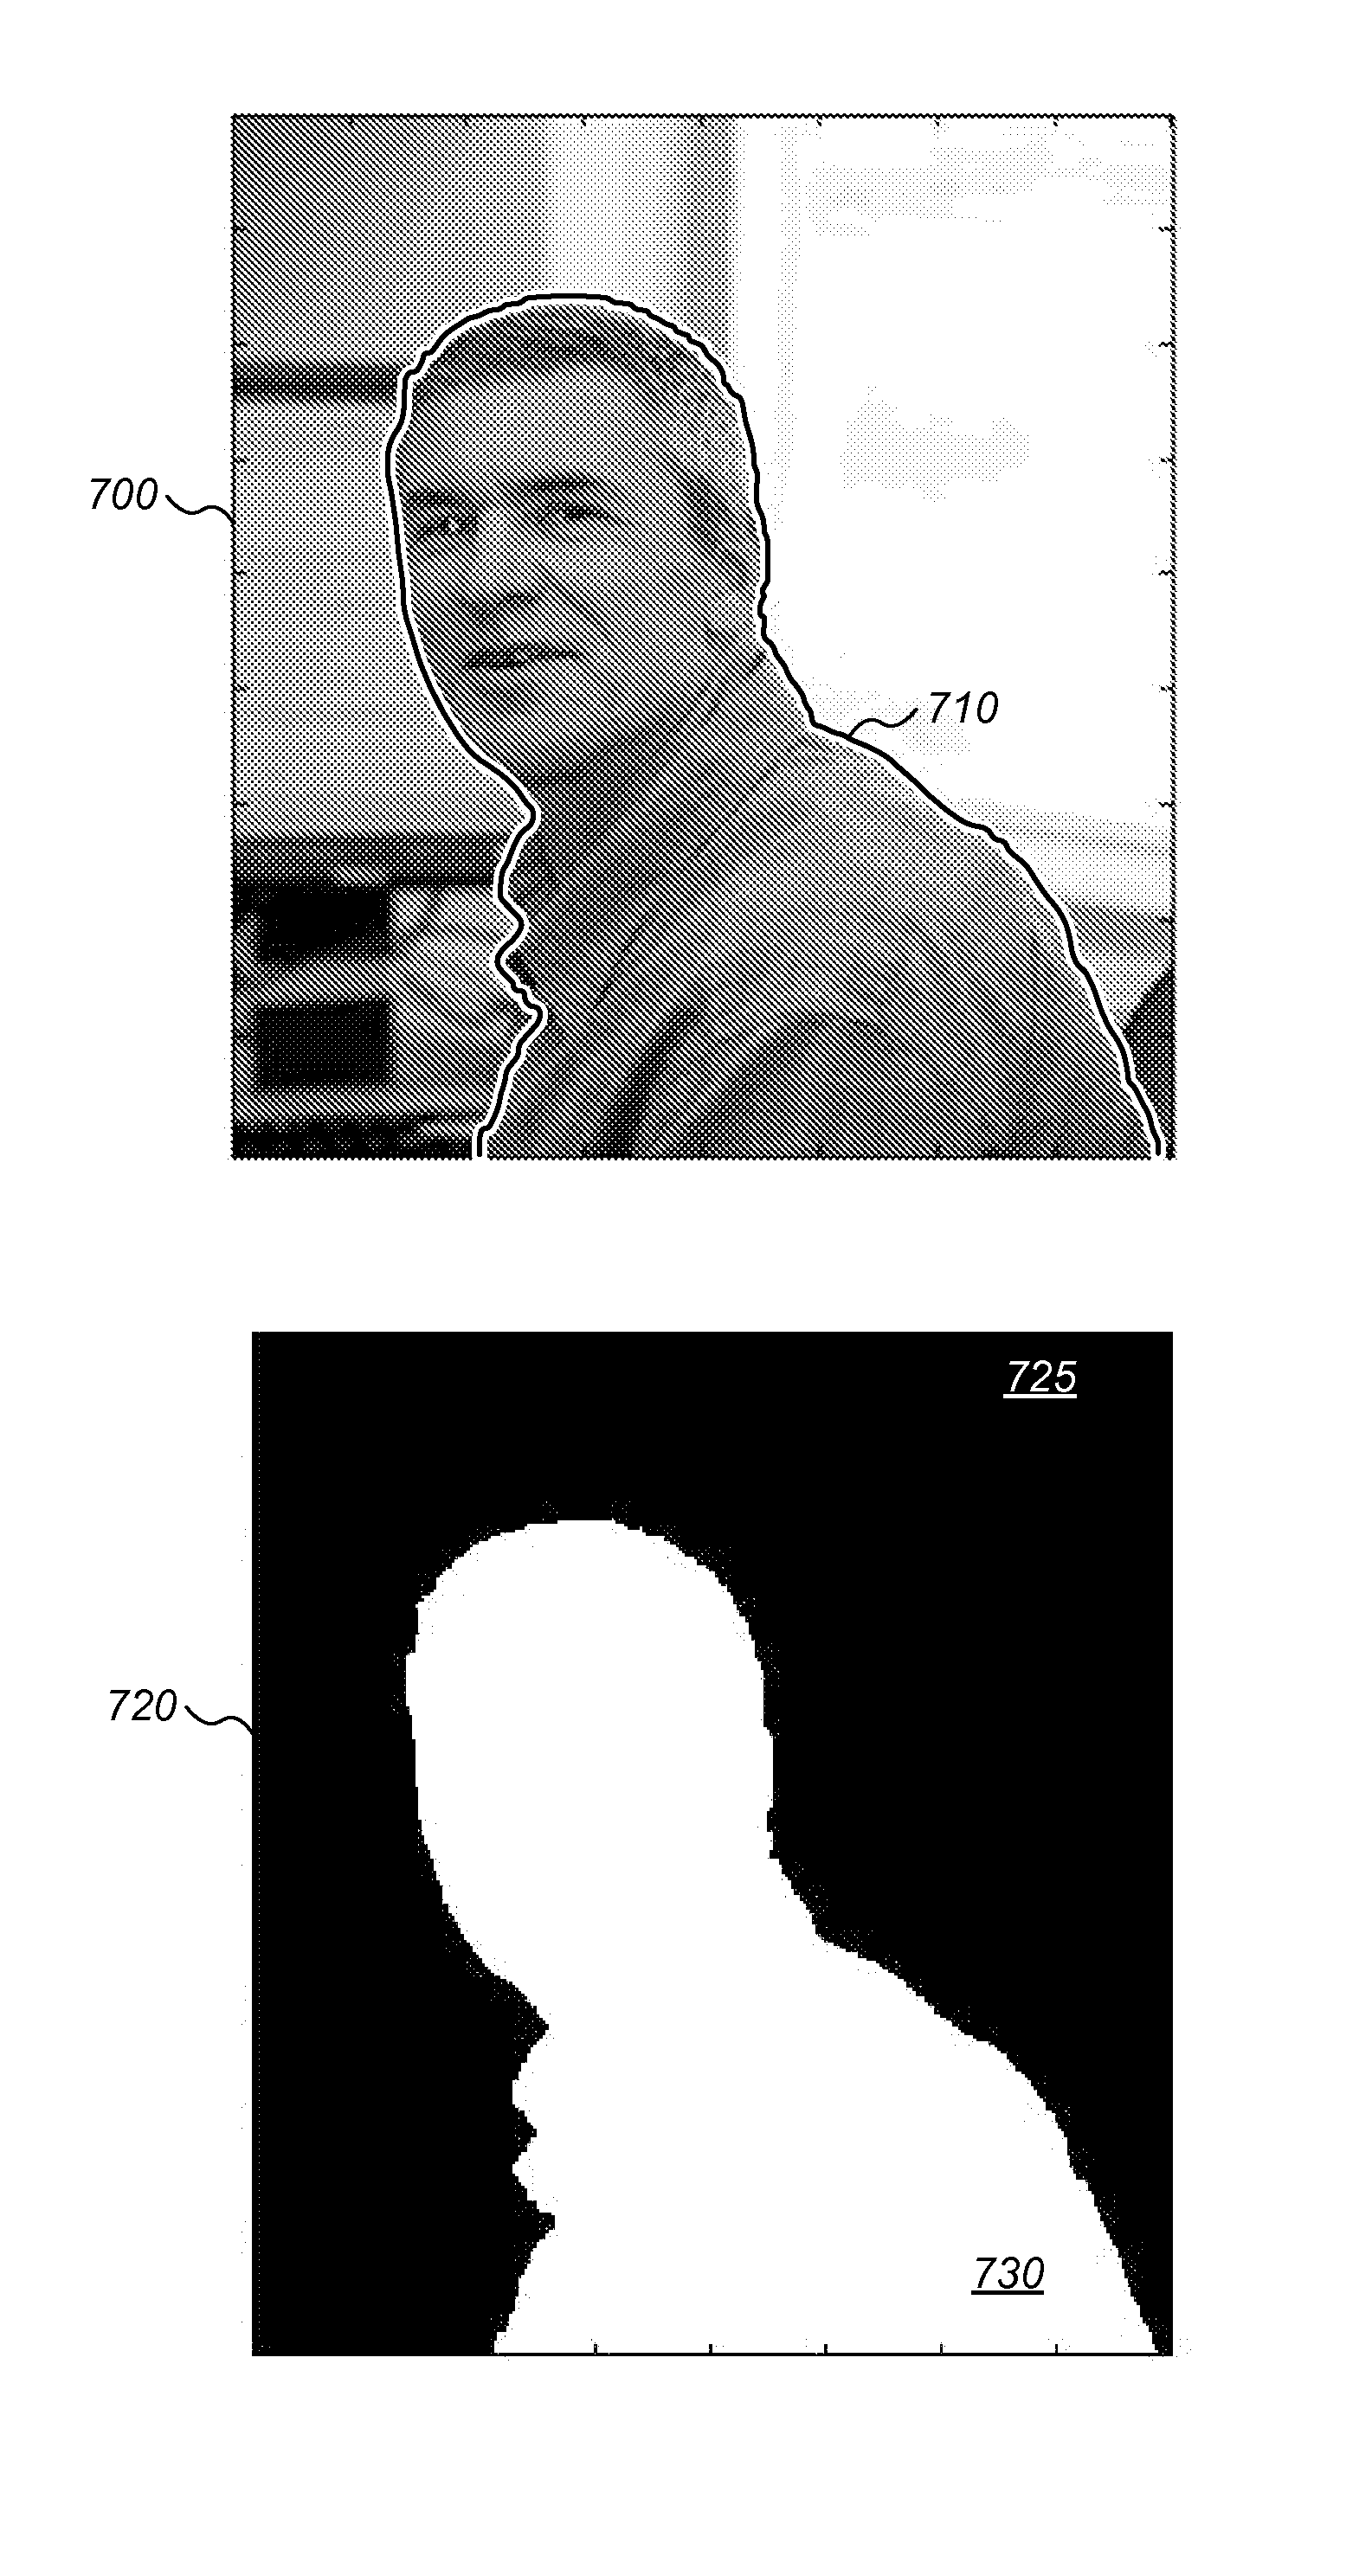 System and Method for Estimating Spatially Varying Defocus Blur in a Digital Image